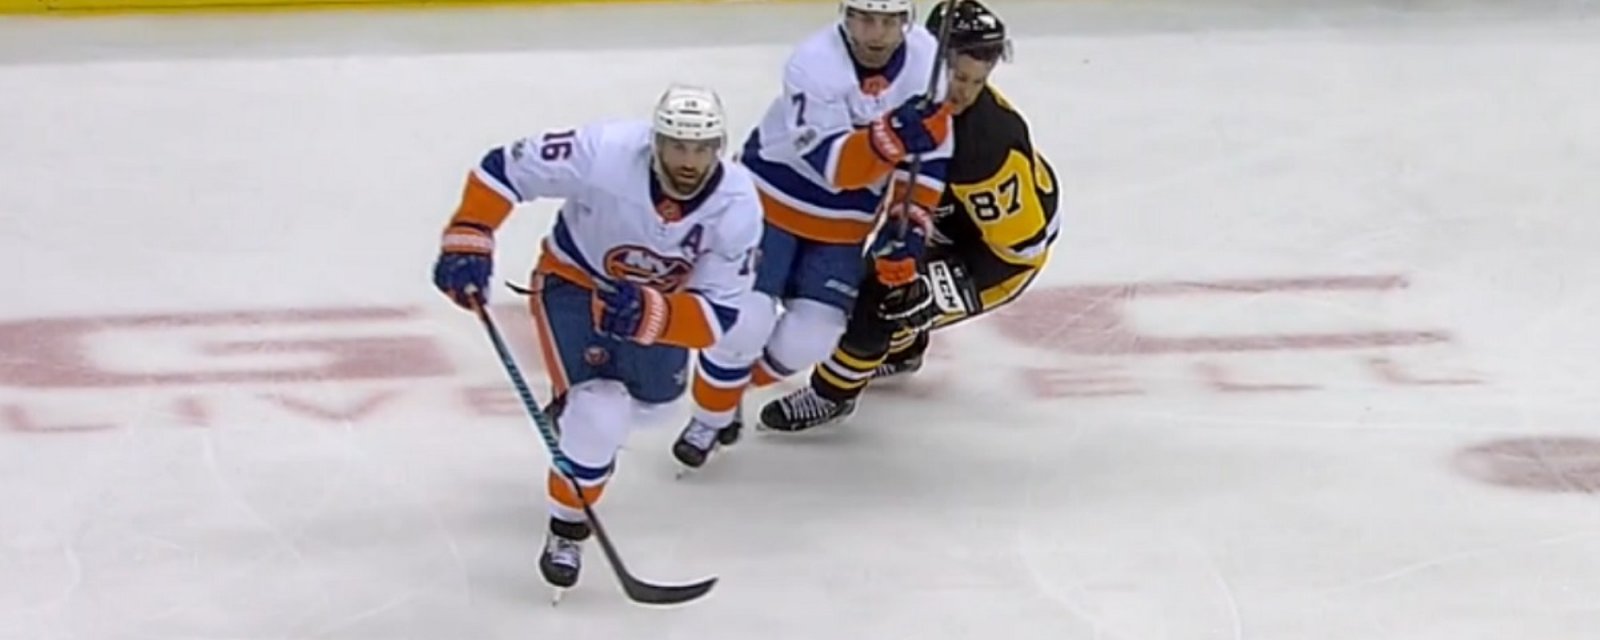 Breaking: Sidney Crosby takes a hit to the head from Jordan Eberle. 